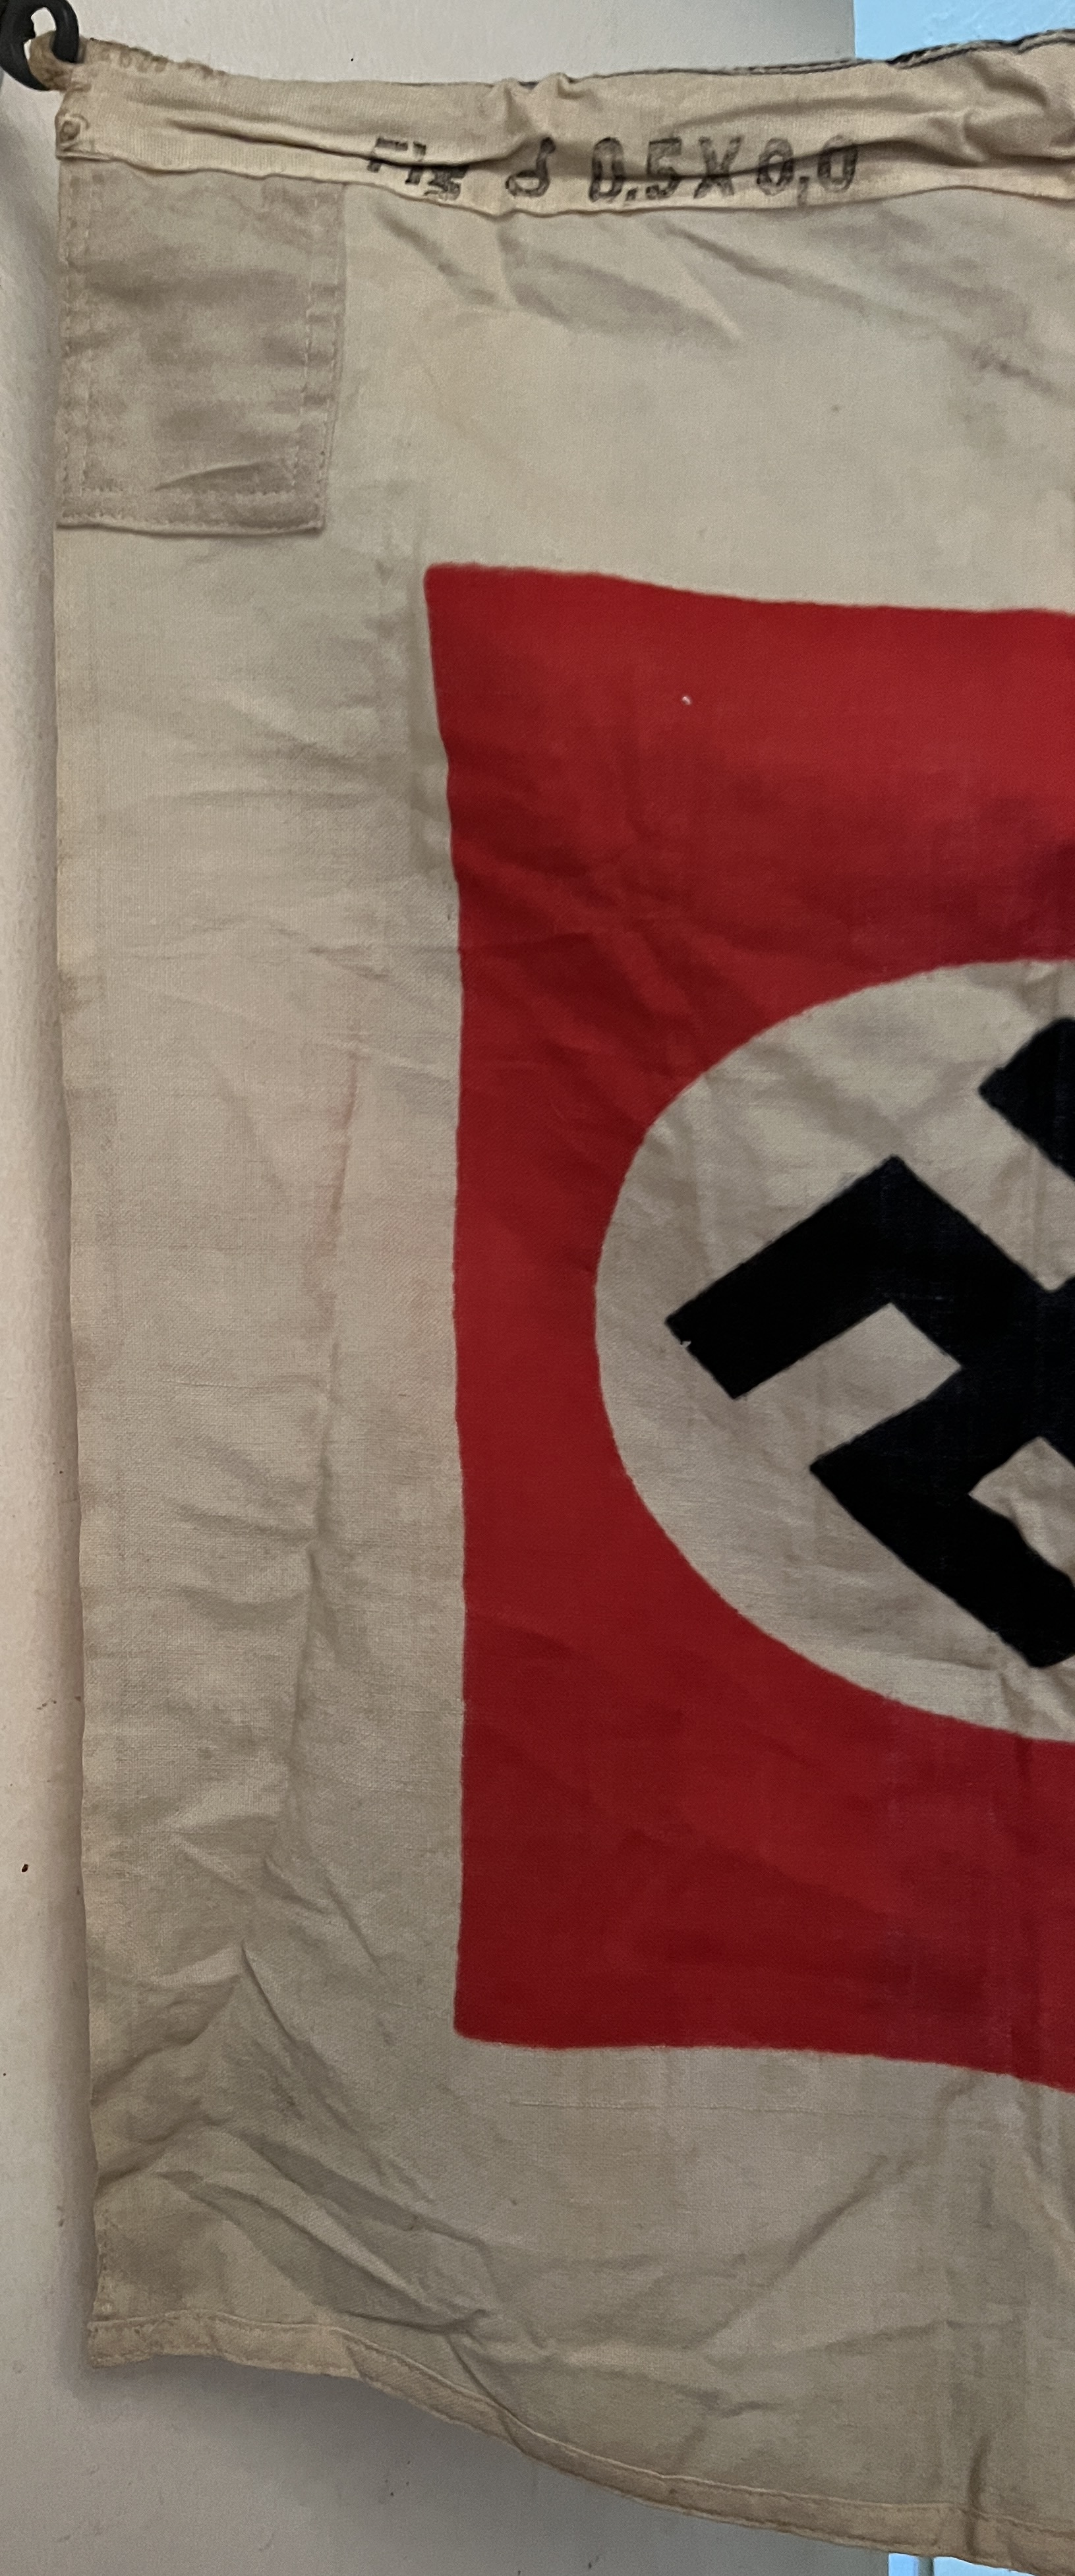 black swastika with red and white background